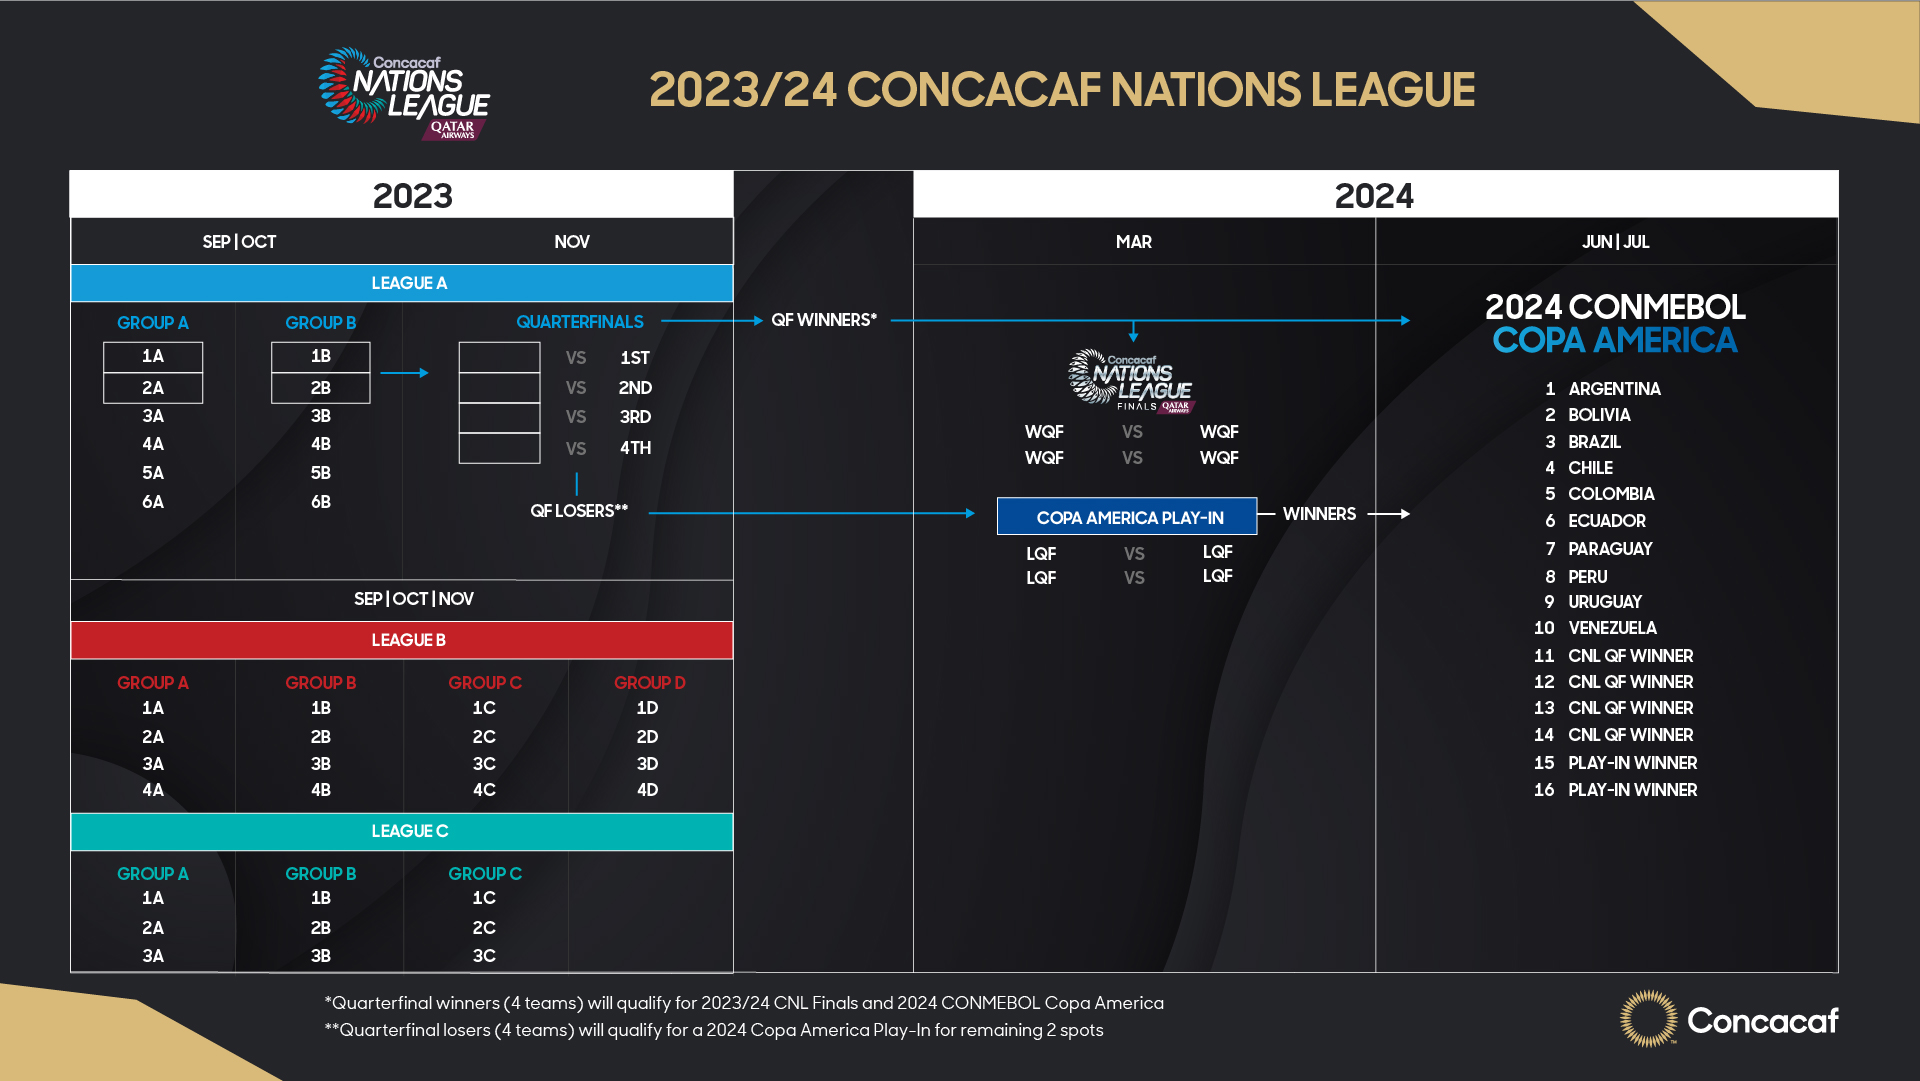 2023/24 Concacaf Nations League